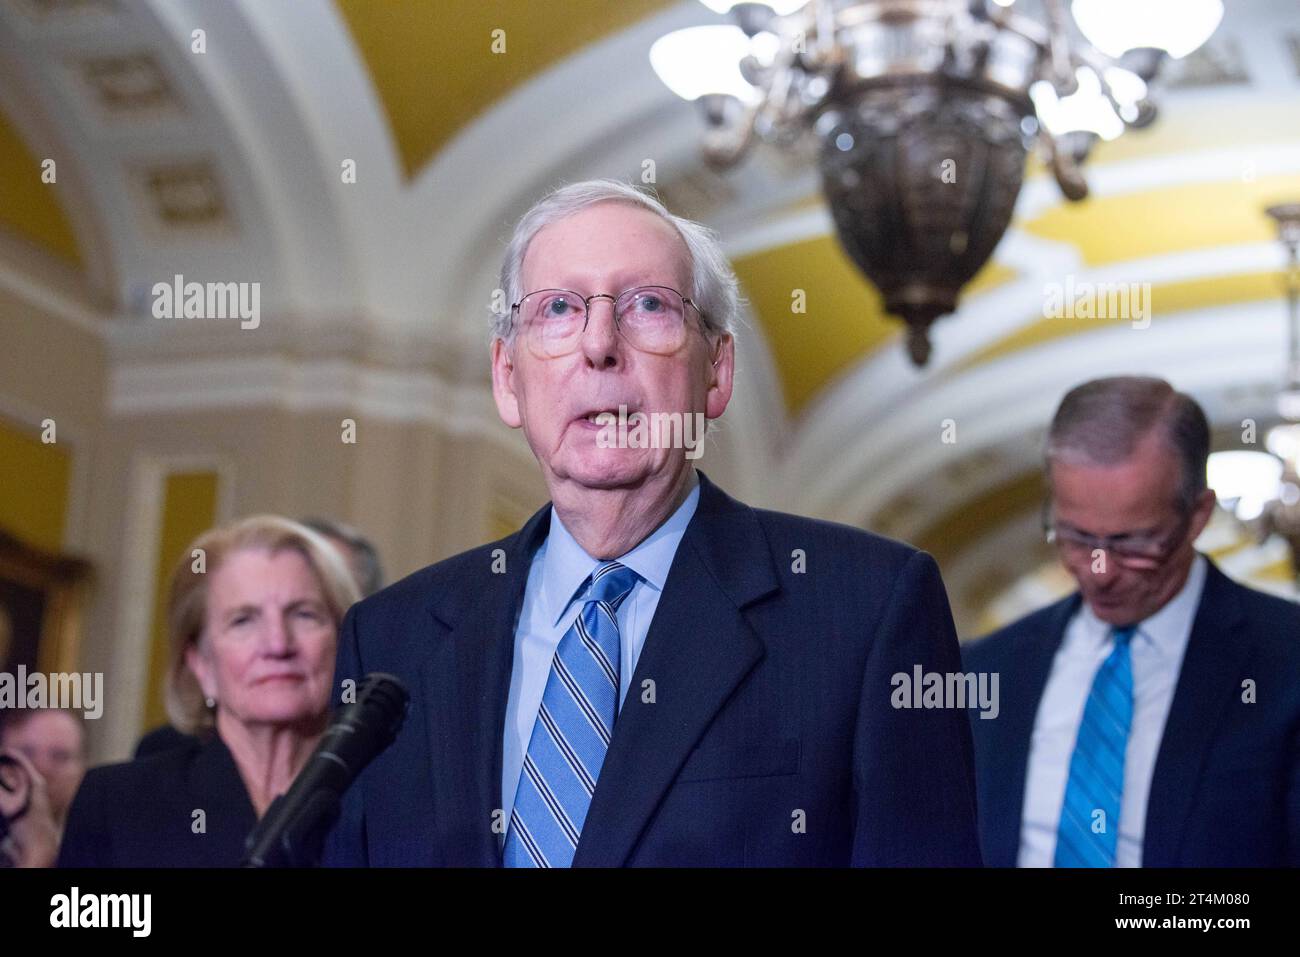 United States Senate Minority Leader Mitch McConnell Republican of Kentucky speaks to the media following the weekly Senate policy luncheon in the US Capitol in Washington, DC on Tuesday, October 31, 2023. Copyright: xAnnabellexGordonx/xCNPx/MediaPunchx Credit: Imago/Alamy Live News Stock Photo